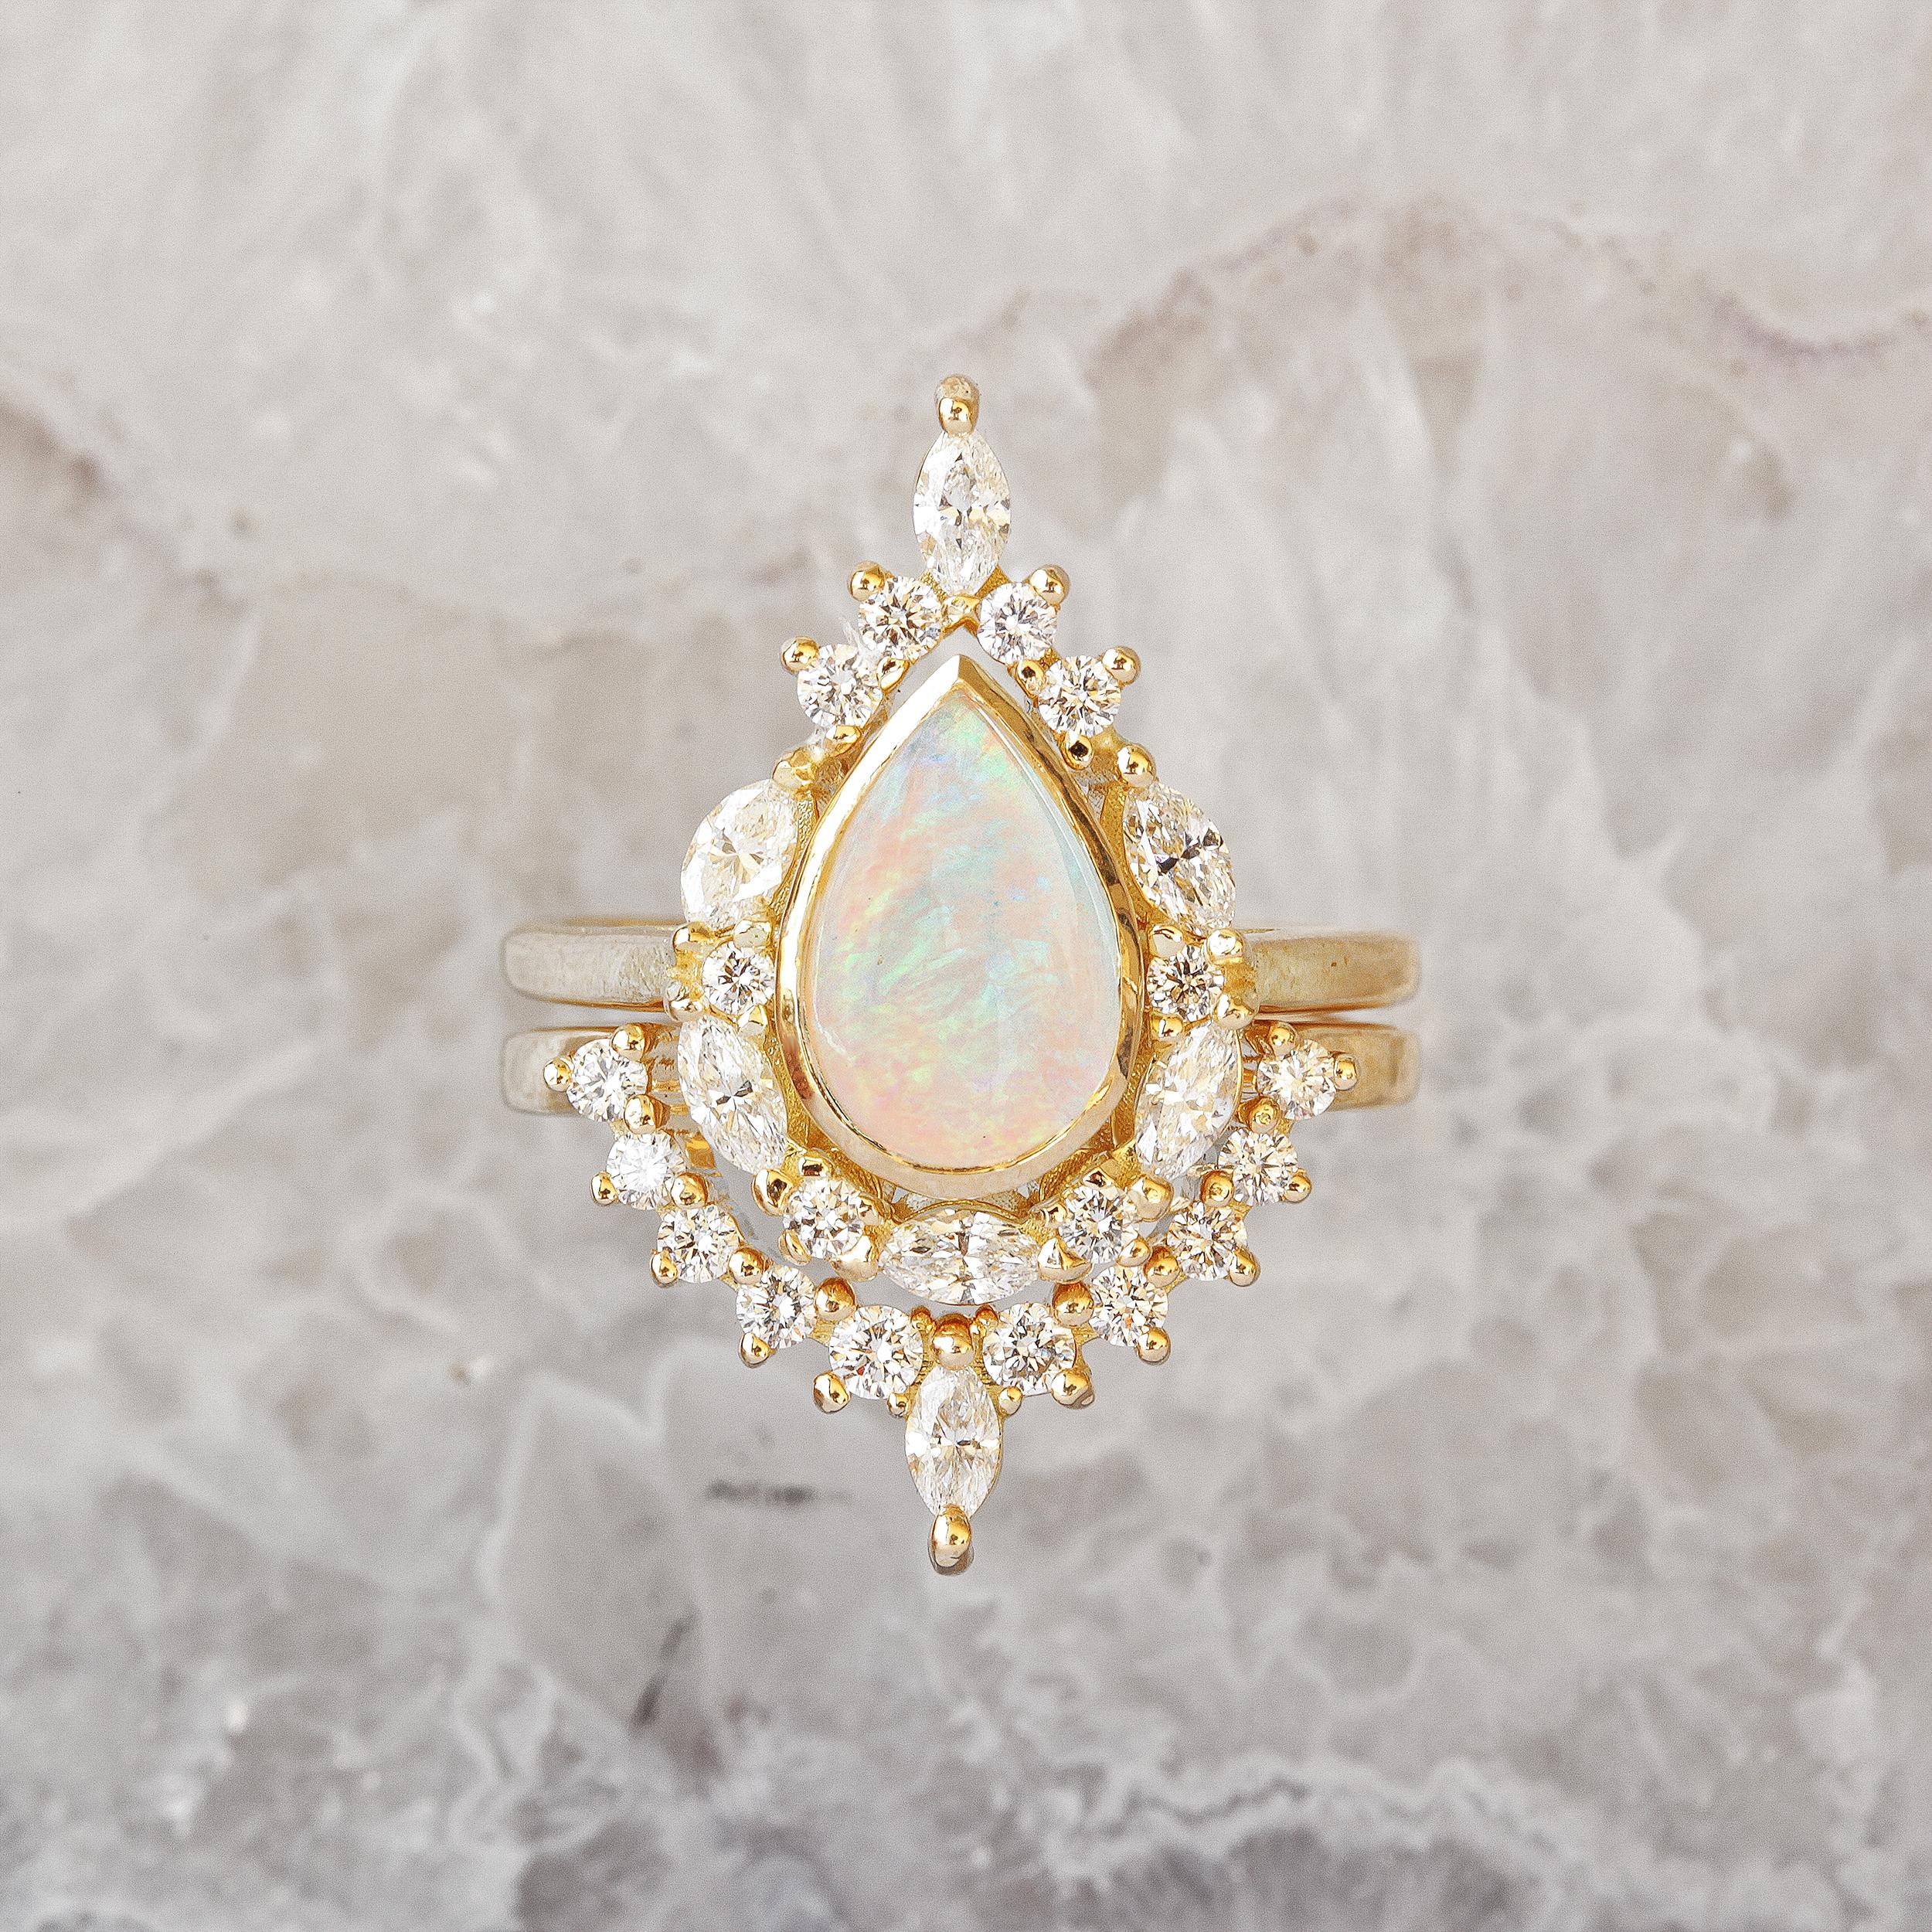 Unique pear Opal Engagement Rings Set - Eva.
The Eva ring is named after the first woman Eva who is graceful, passionate, and full of energy & laughter. 
The center stone can be personalized.
* The list is for a two ring set.
Handmade with care. 
An